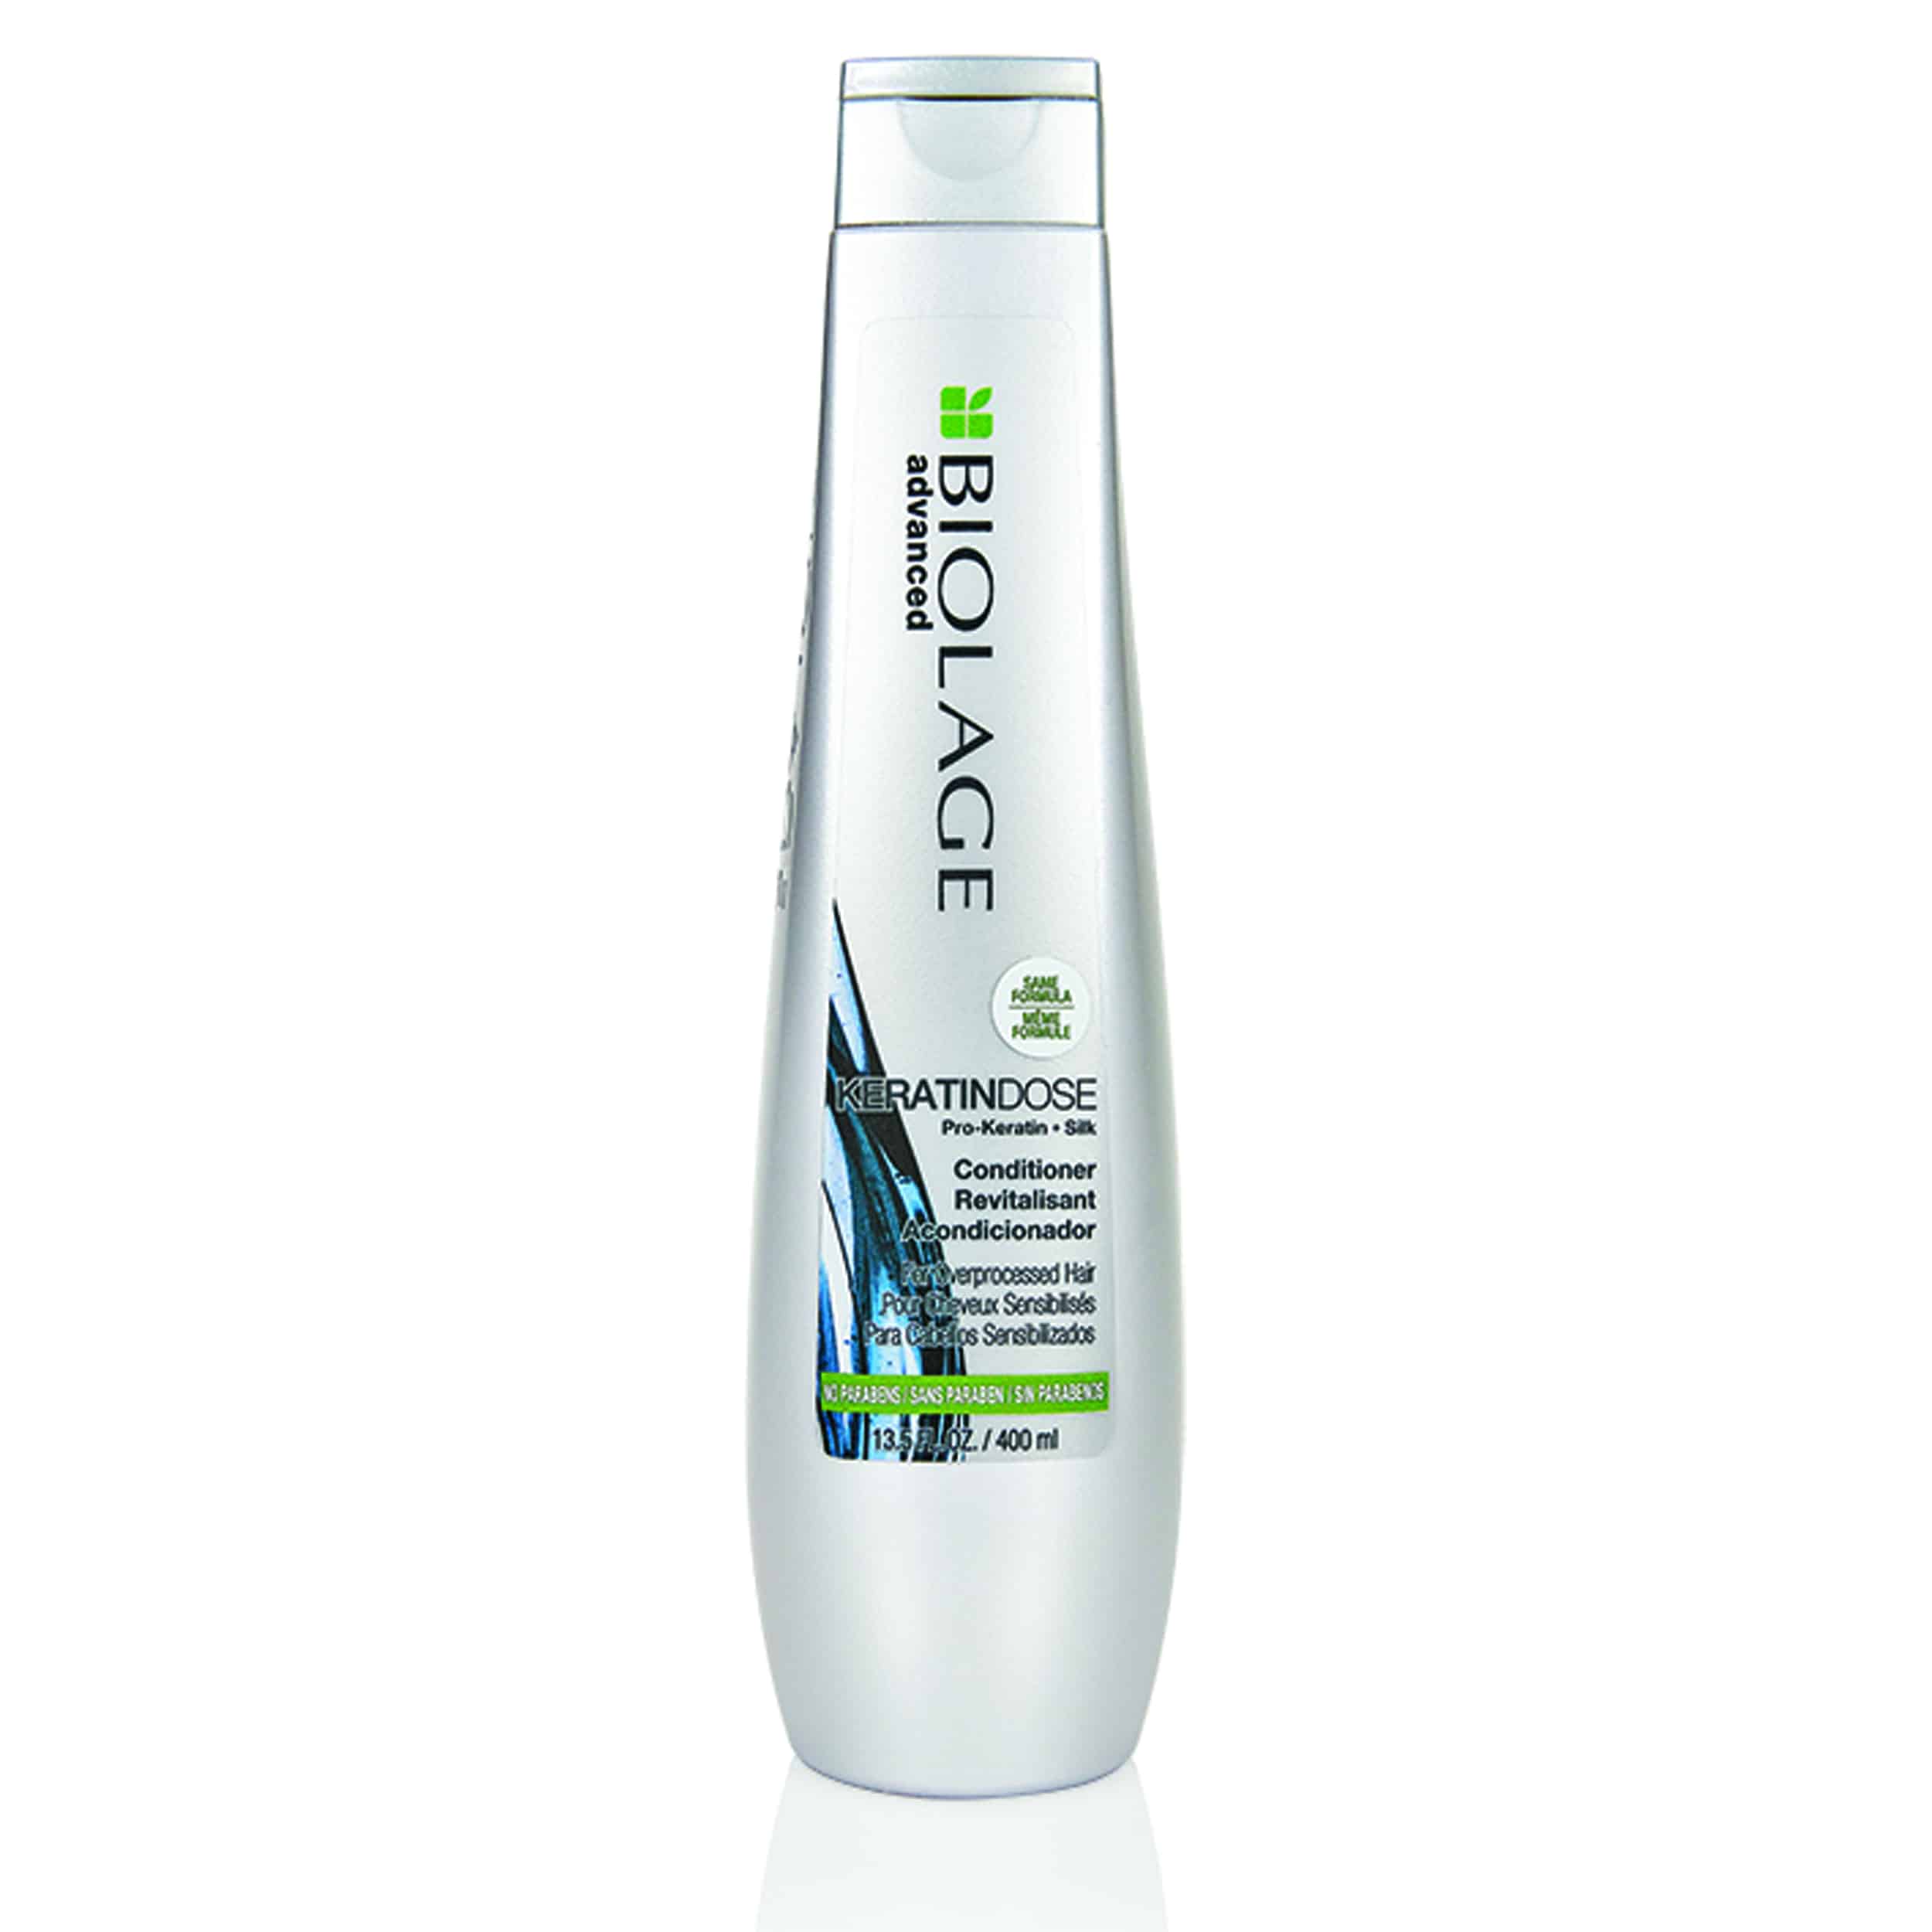 Biolage Advanced Solutions Keratindose Conditioner for Over-Processed Hair 400ml[DEL]